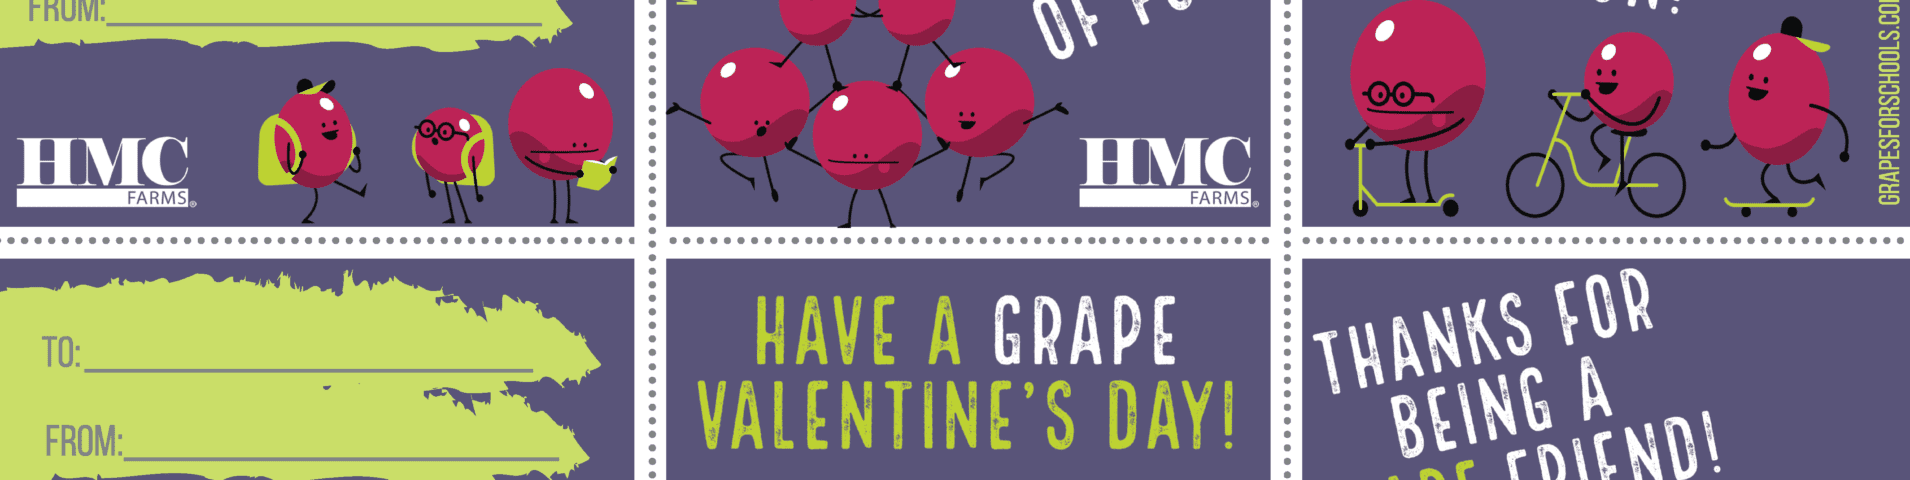 Sheet of 6 valentines featuring animated grape characters